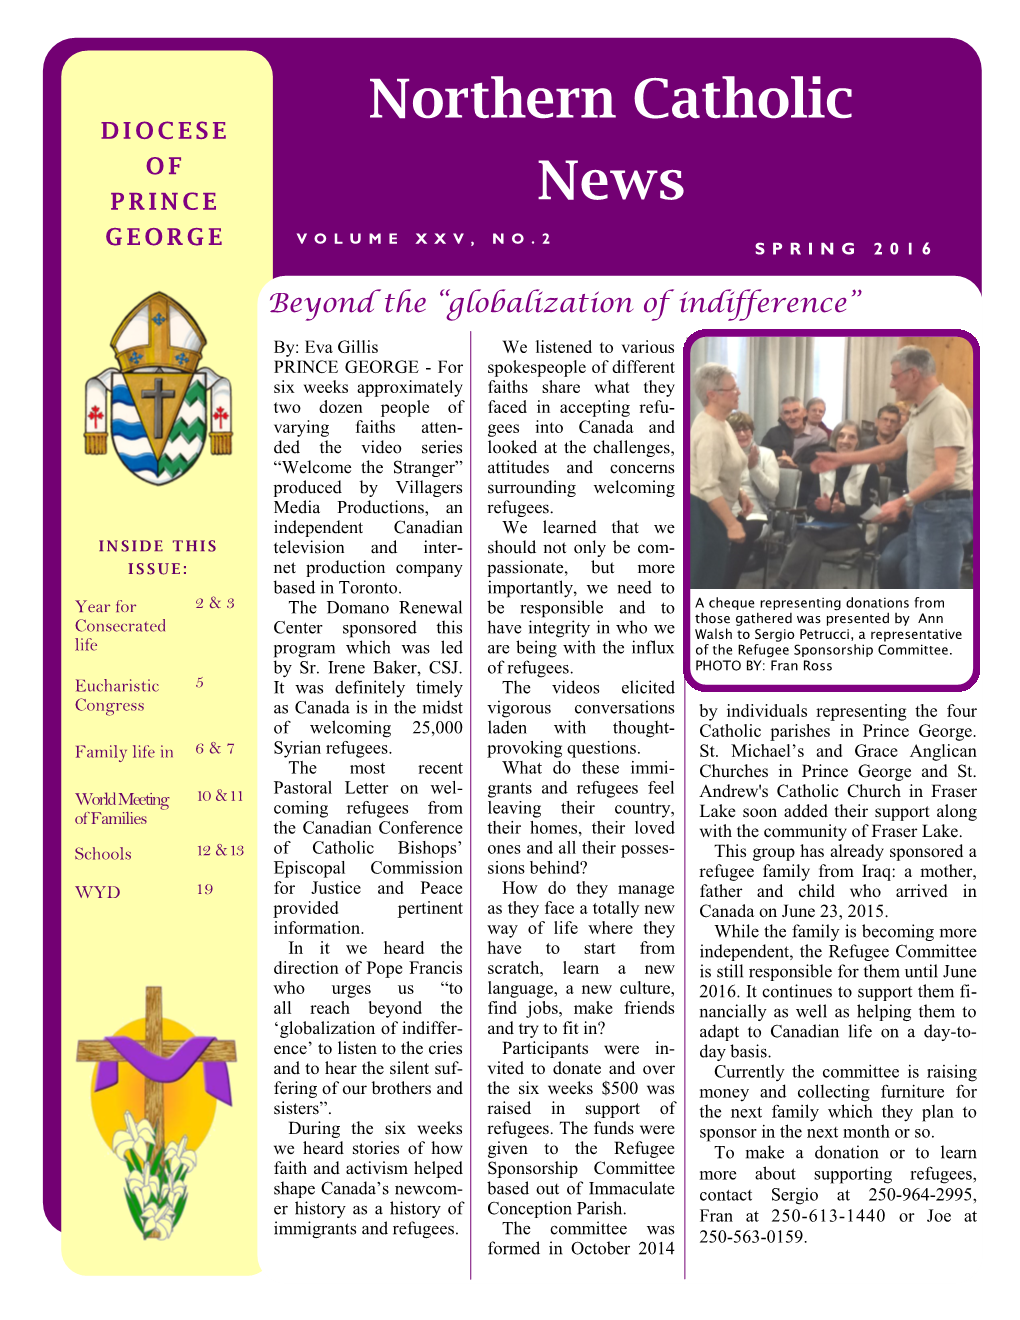 Northern Catholic News on February 2, 2016, the Feast of the Works of Mercy That Met the Needs of Their Published by the Presentation of the Lord, the Diocese Times